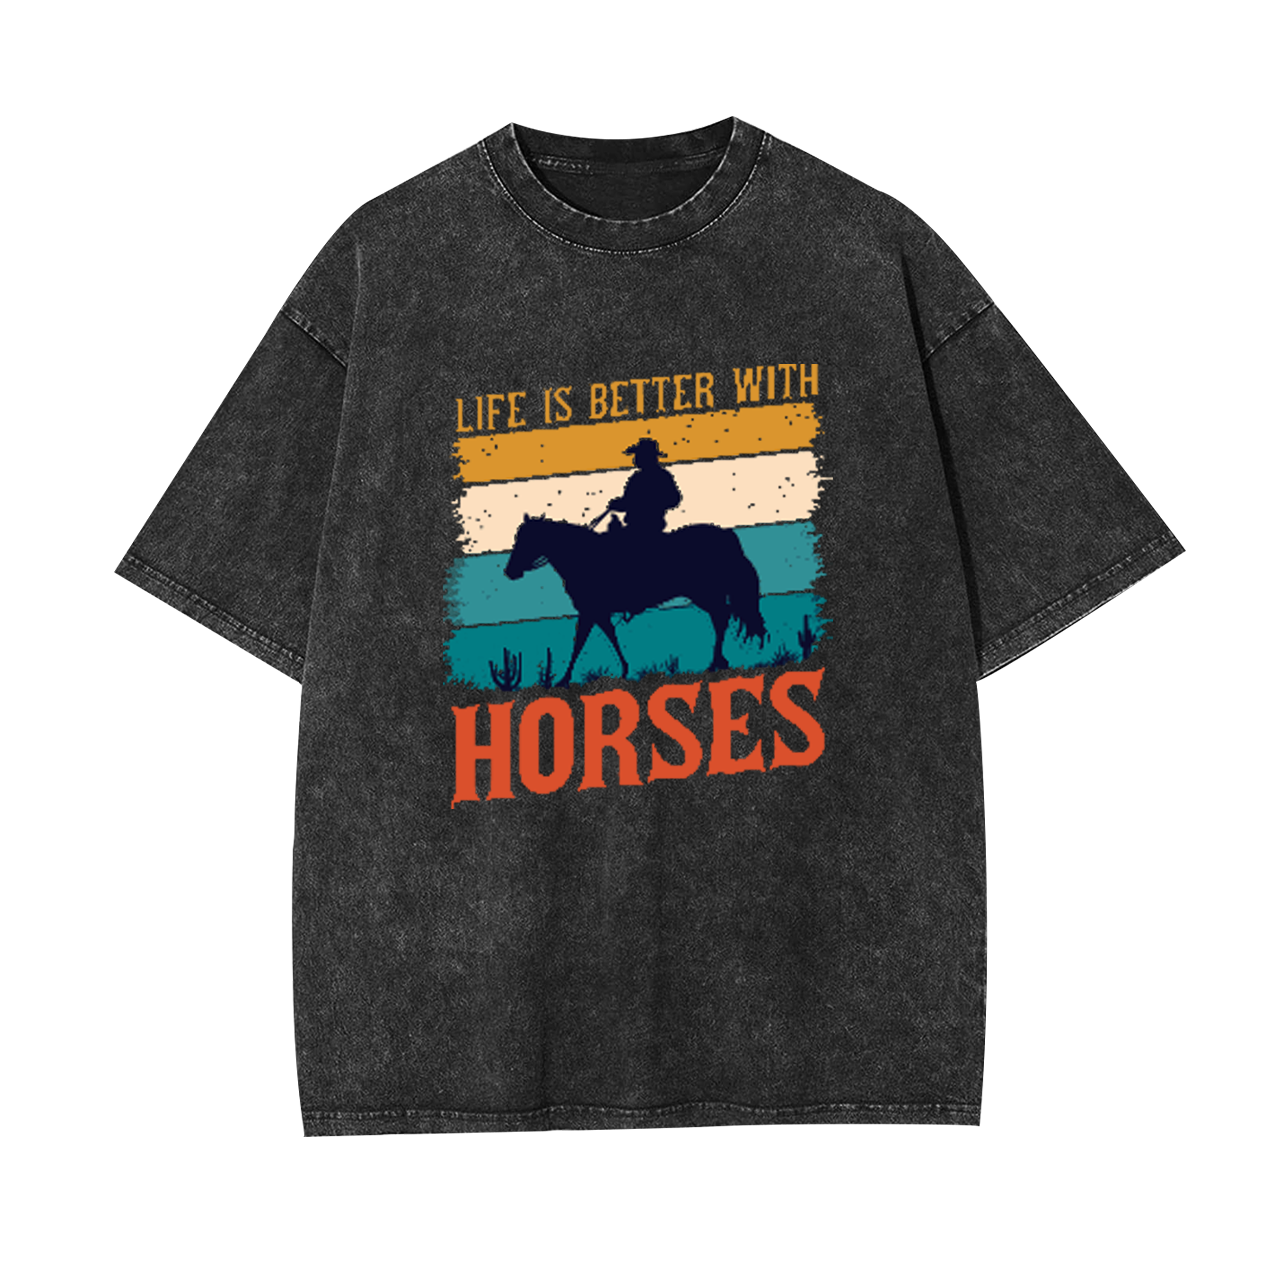 Life Is Better With Horses Garment-dye Tees